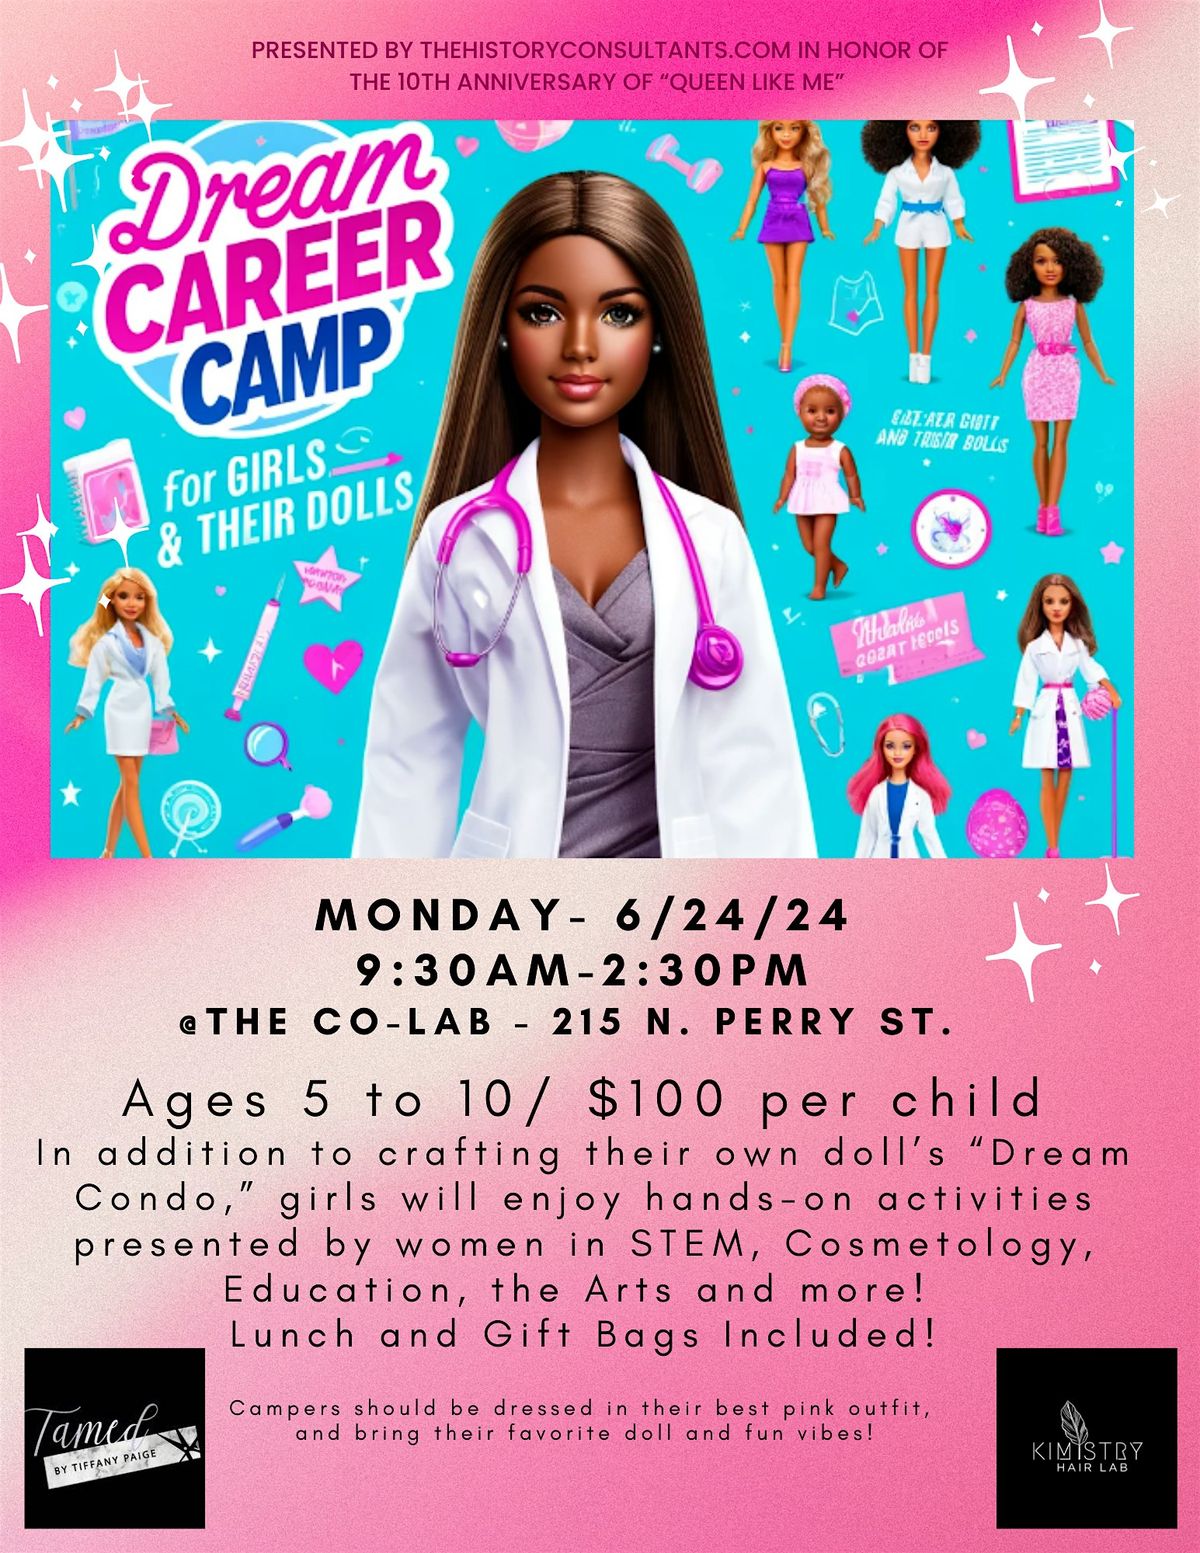 Dream Career Camp for Girls and Their Dolls